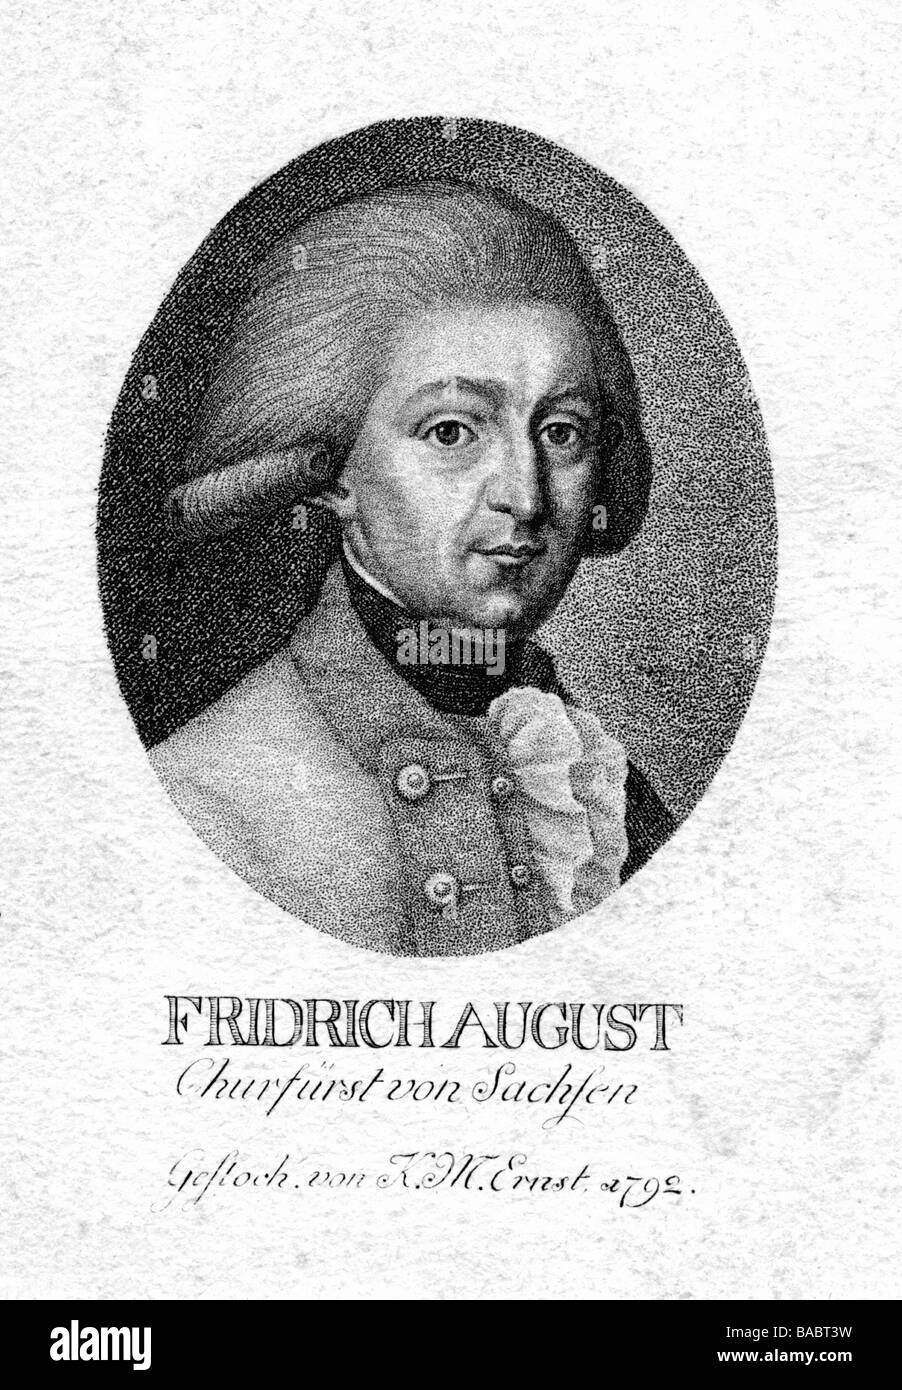 Frederick Augustus I, 23.12.1750 - 31.5.1827, King of Saxony 11.12. 1806 - 31.5.1827, portrait, copper engraving by K. M. Ernst, 1792, , Artist's Copyright has not to be cleared Stock Photo